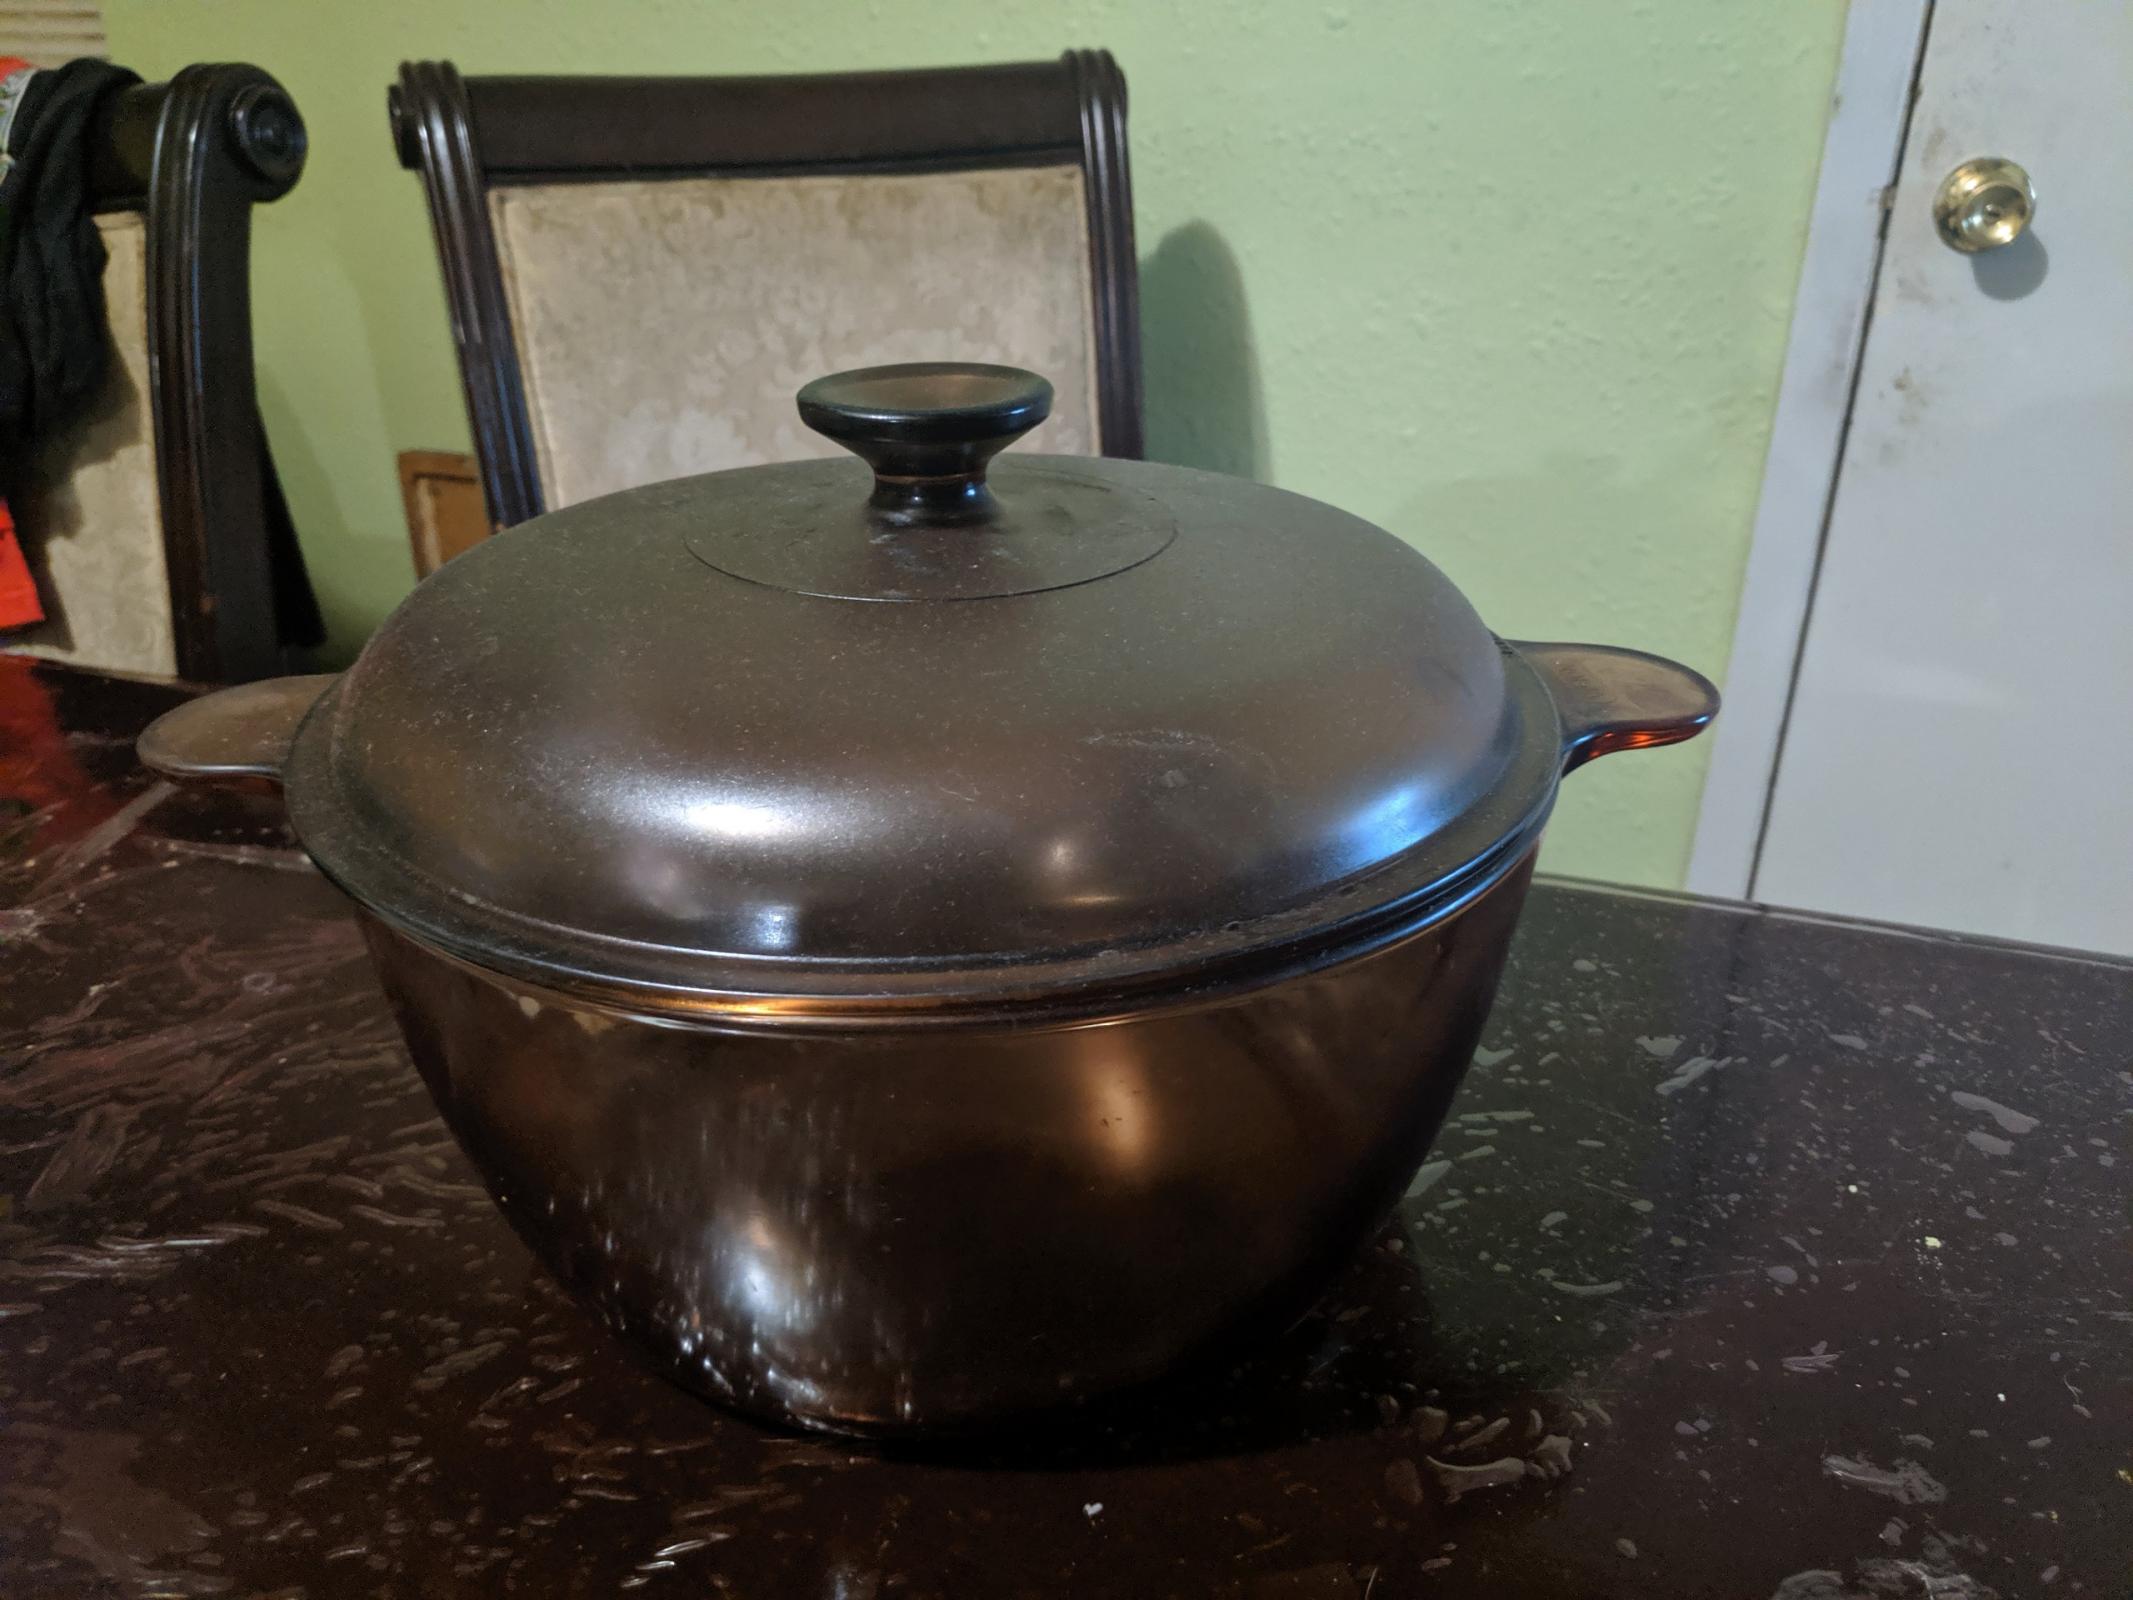 Is My Cookware Really Oven-Safe?